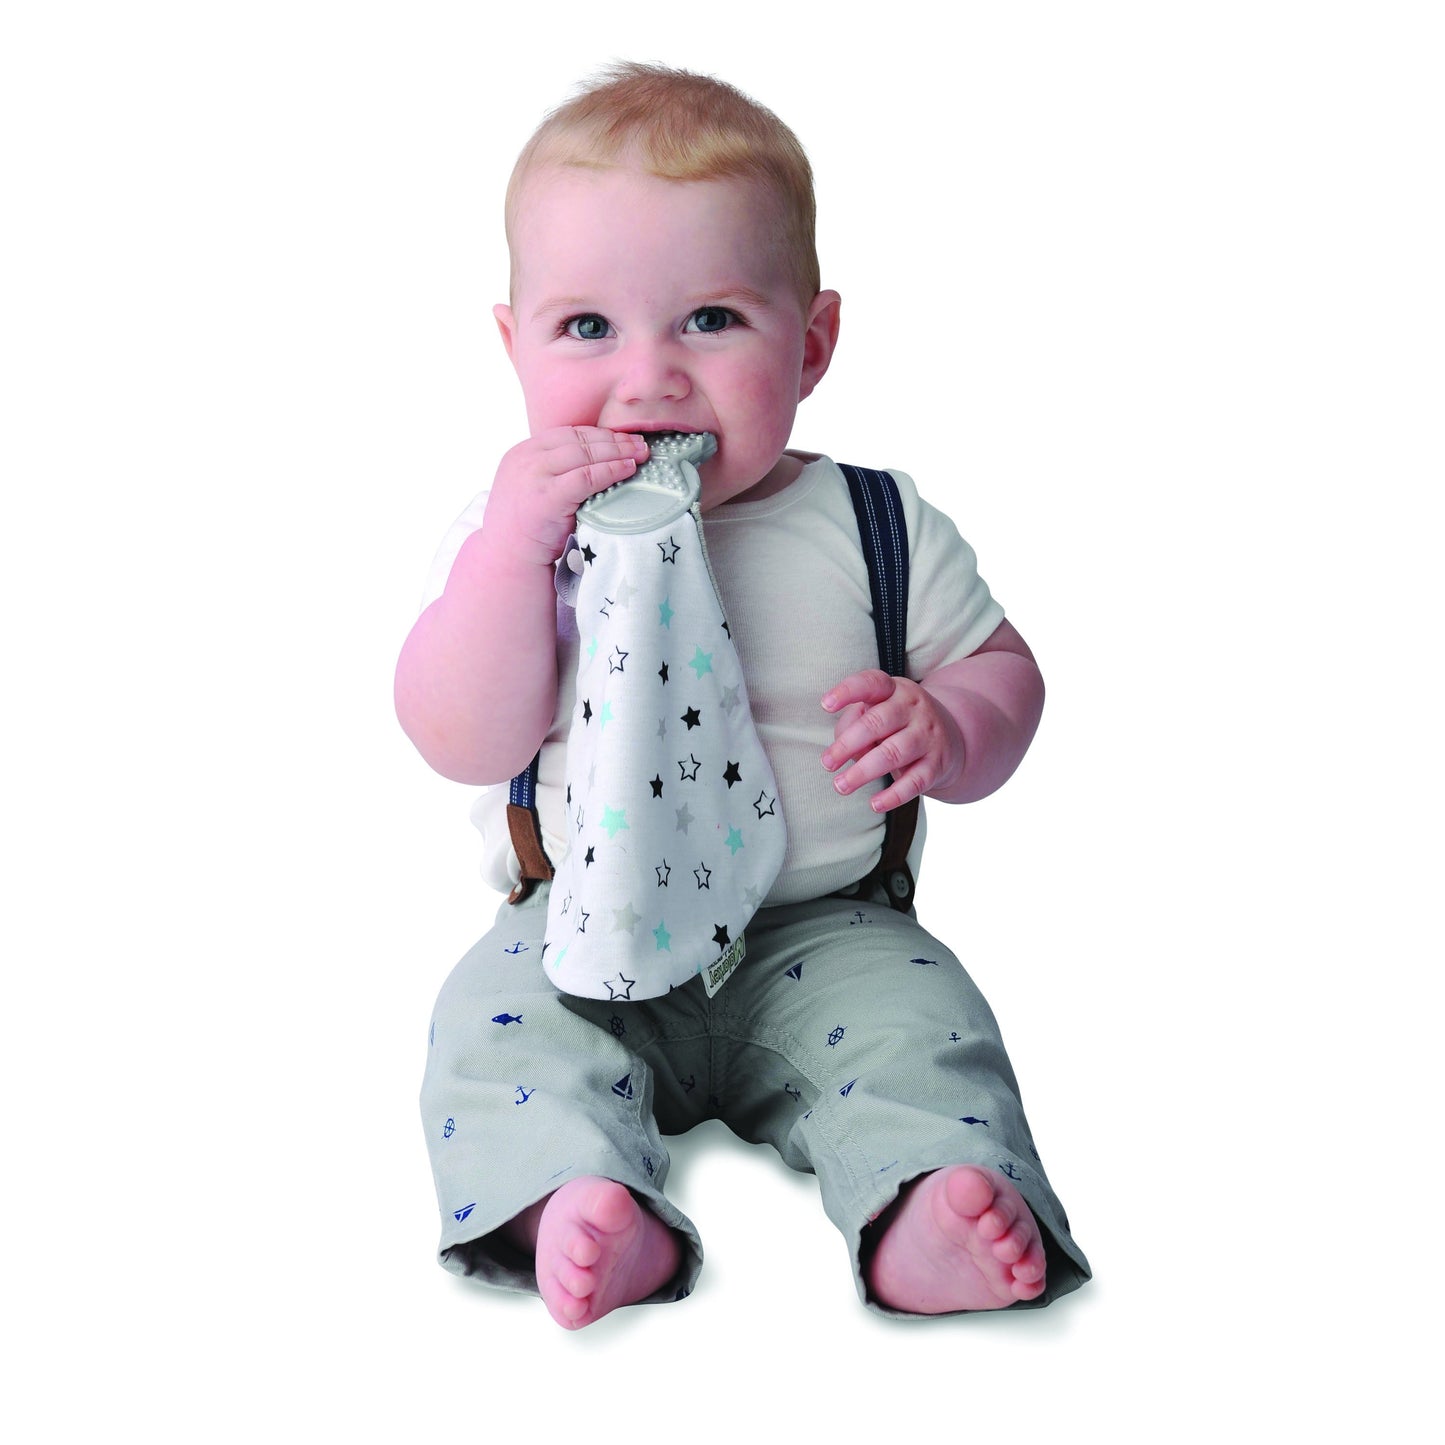 Munch-It Blanket - Twinkle Twinkle a convenient teether and cozy blanket for baby. Designed to target baby's emerging front& eye teeth as well as early molars.  The soft blanket is perfect for snuggling and absorbing drool